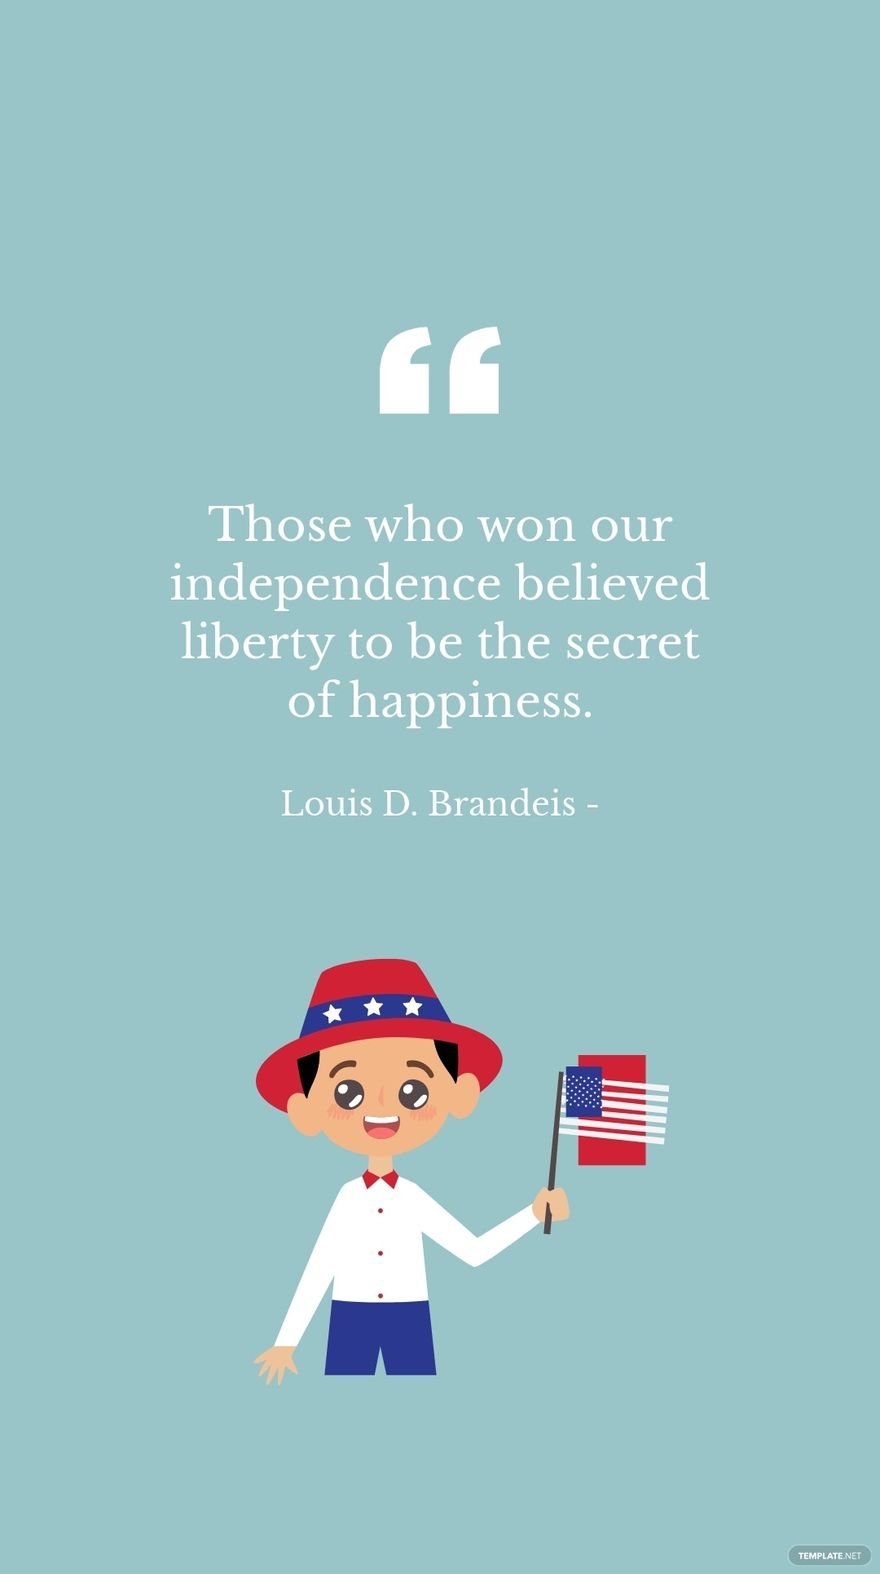 Louis D. Brandeis - Those who won our independence believed liberty to be the secret of happiness.